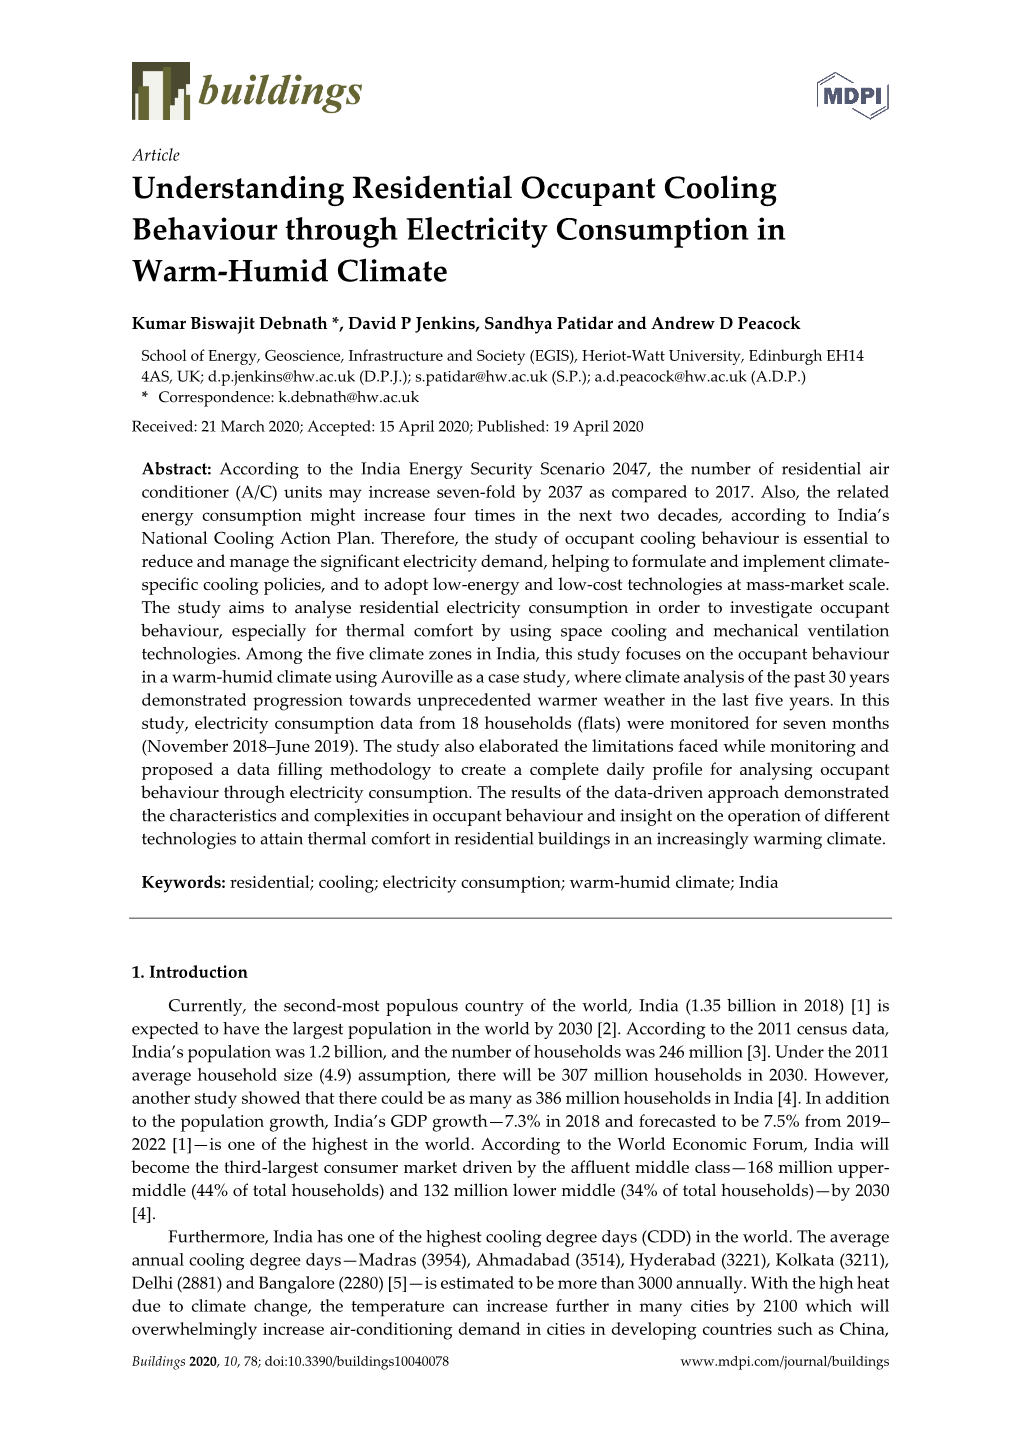 Understanding Residential Occupant Cooling Behaviour Through Electricity Consumption in Warm-Humid Climate